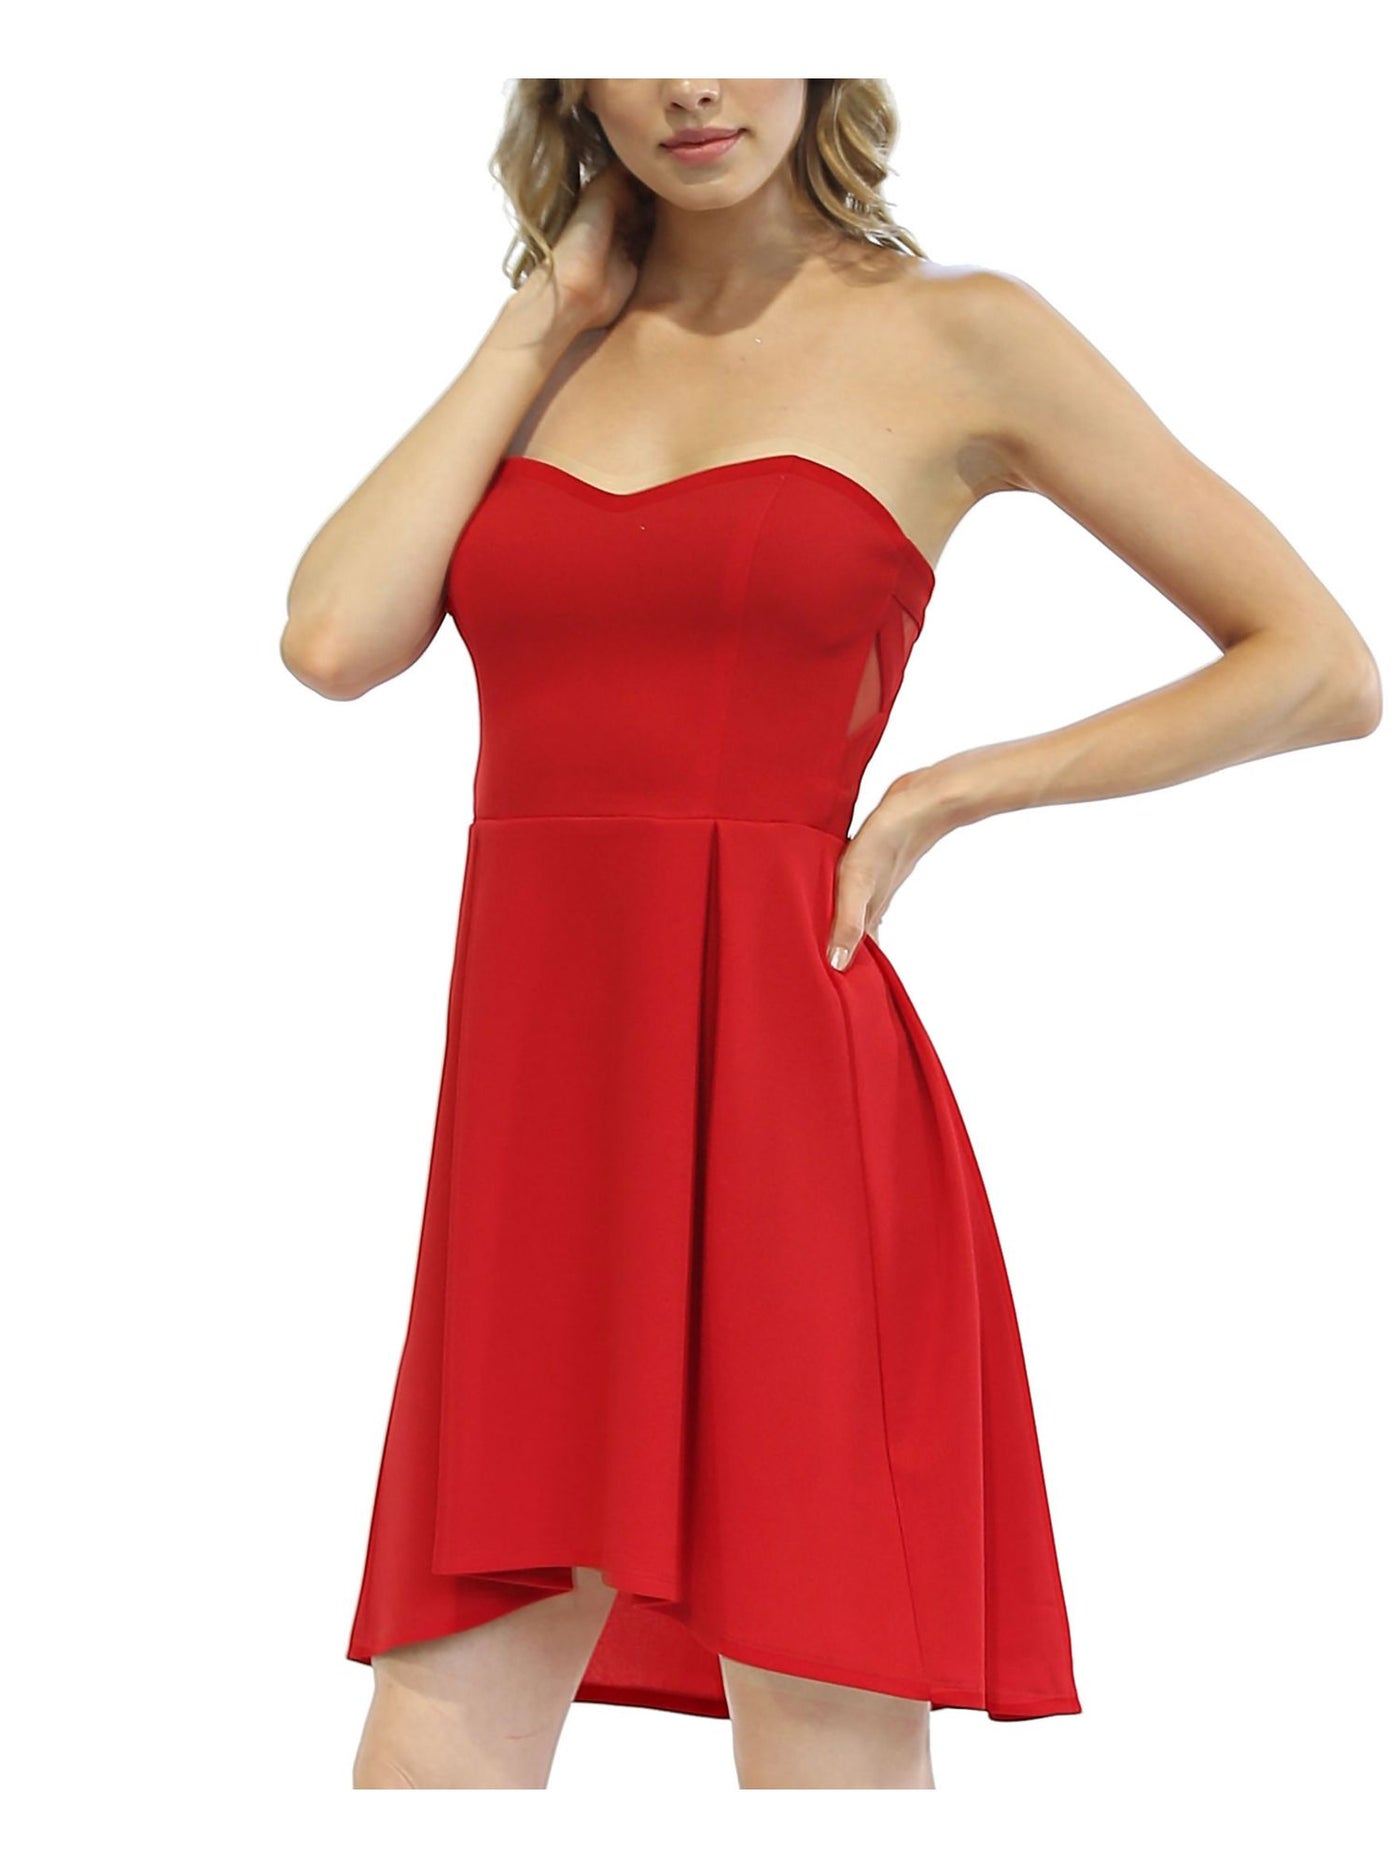 TEEZE ME Womens Red Zippered High-low Strapless Short Party Fit + Flare Dress Juniors L